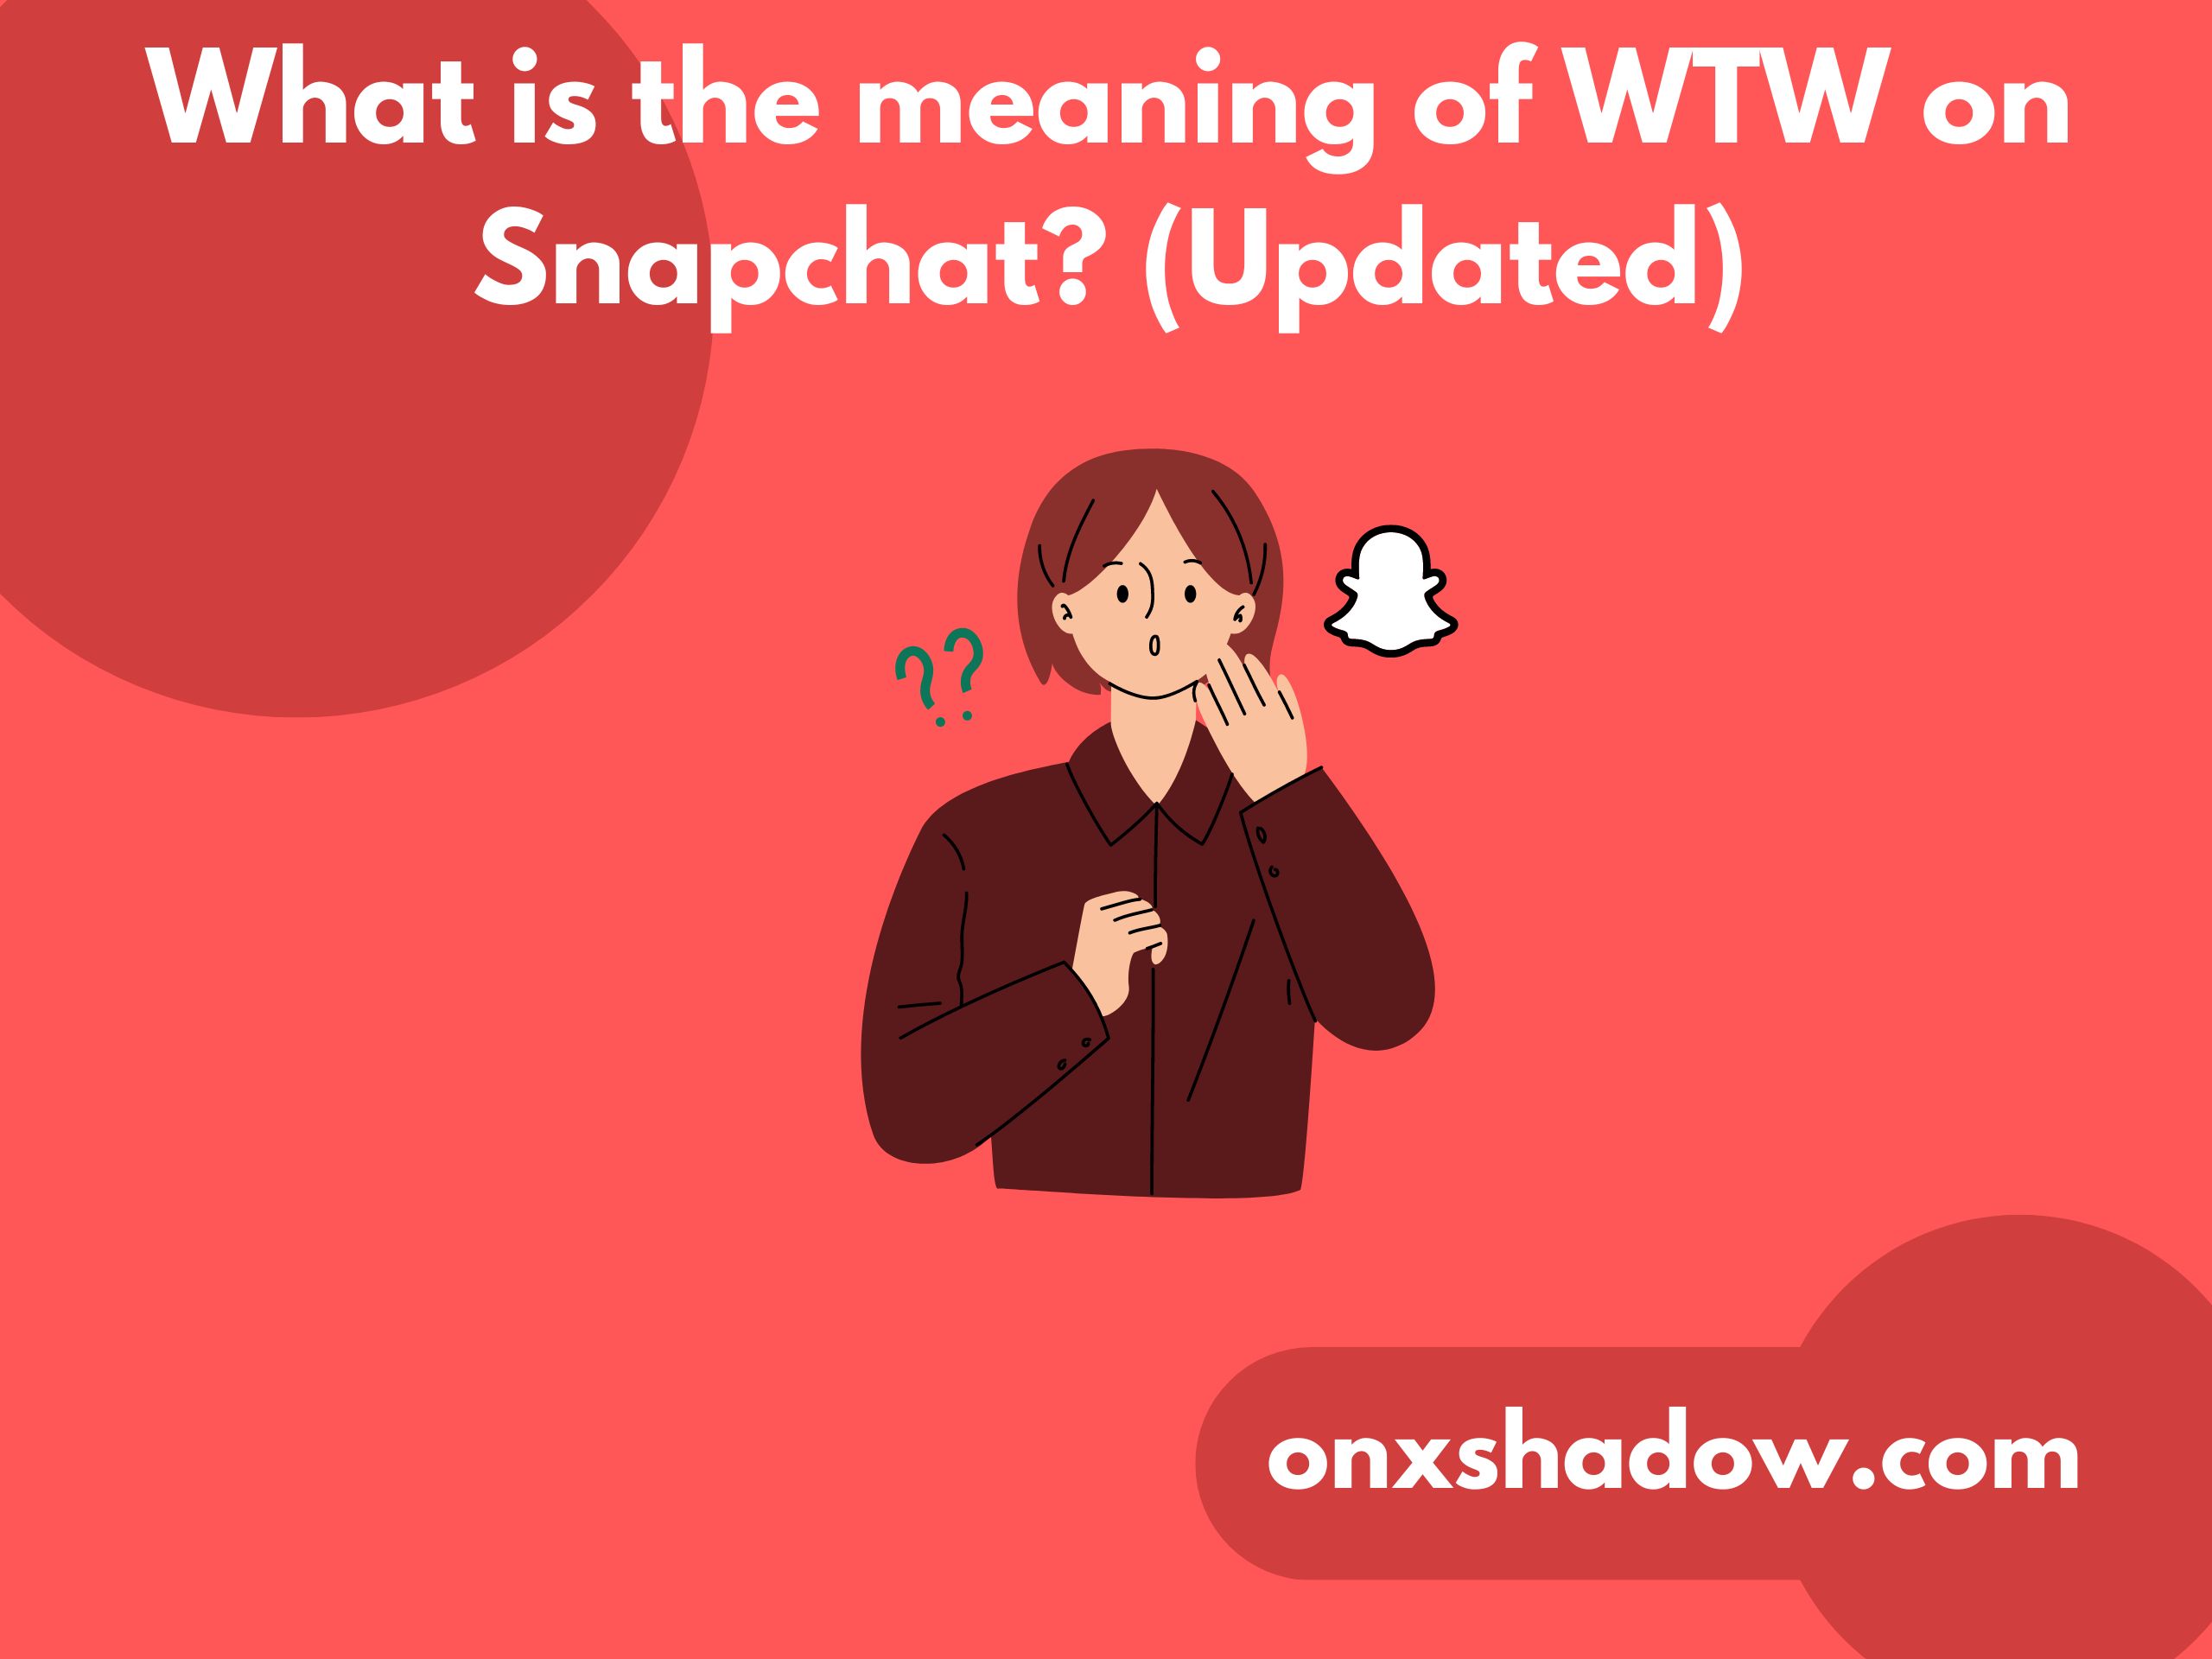 What is the meaning of WTW on Snapchat? (Updated)